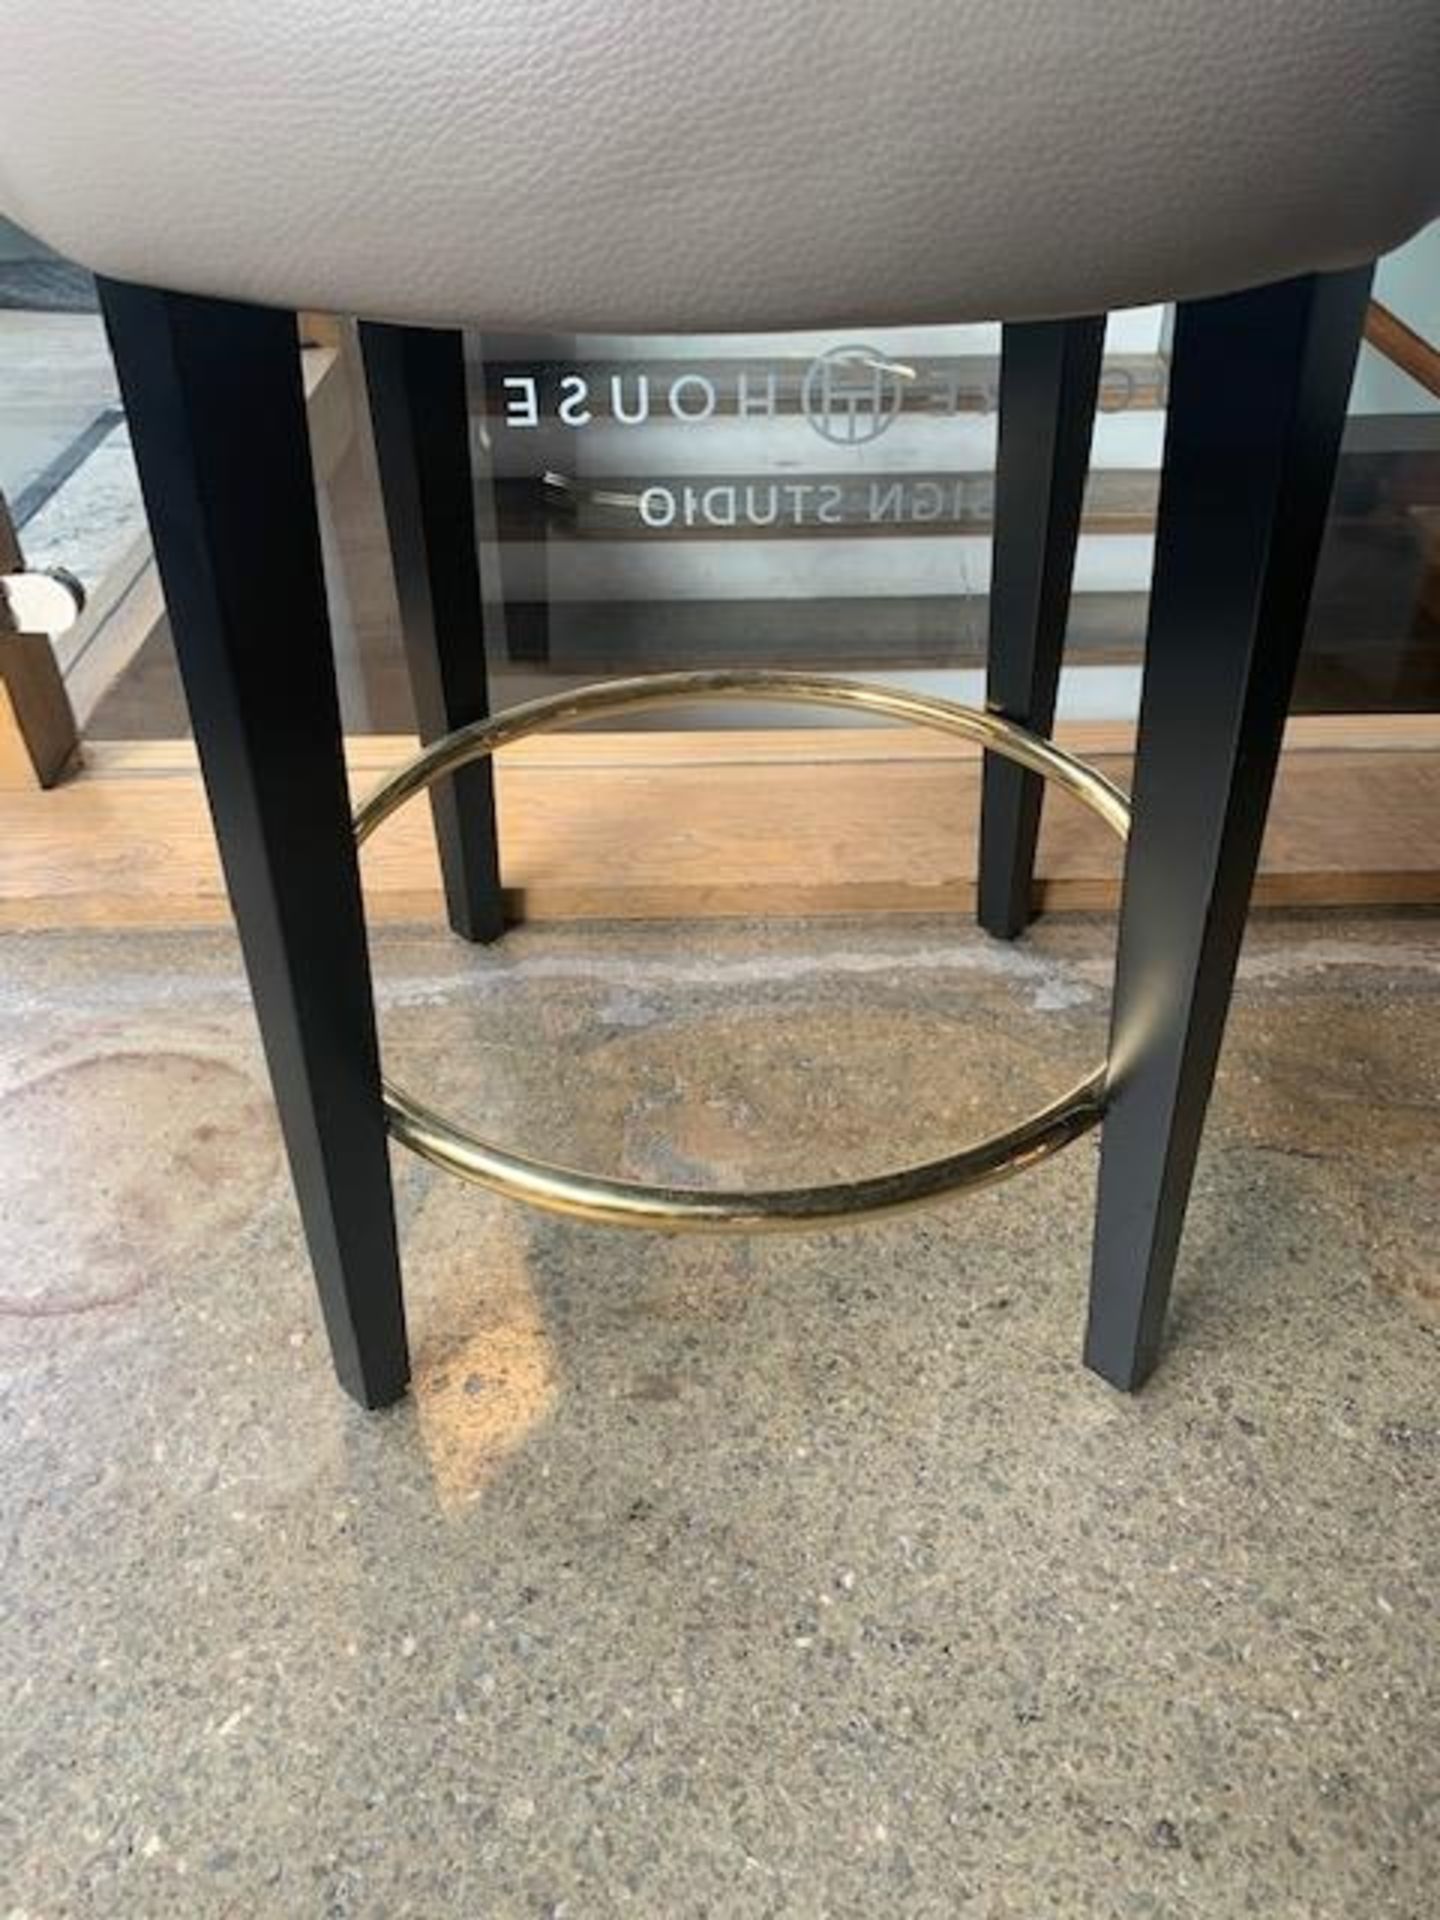 Bespoke Tub Bar Stool with grey leather, black legs & brass footrest - Image 4 of 4